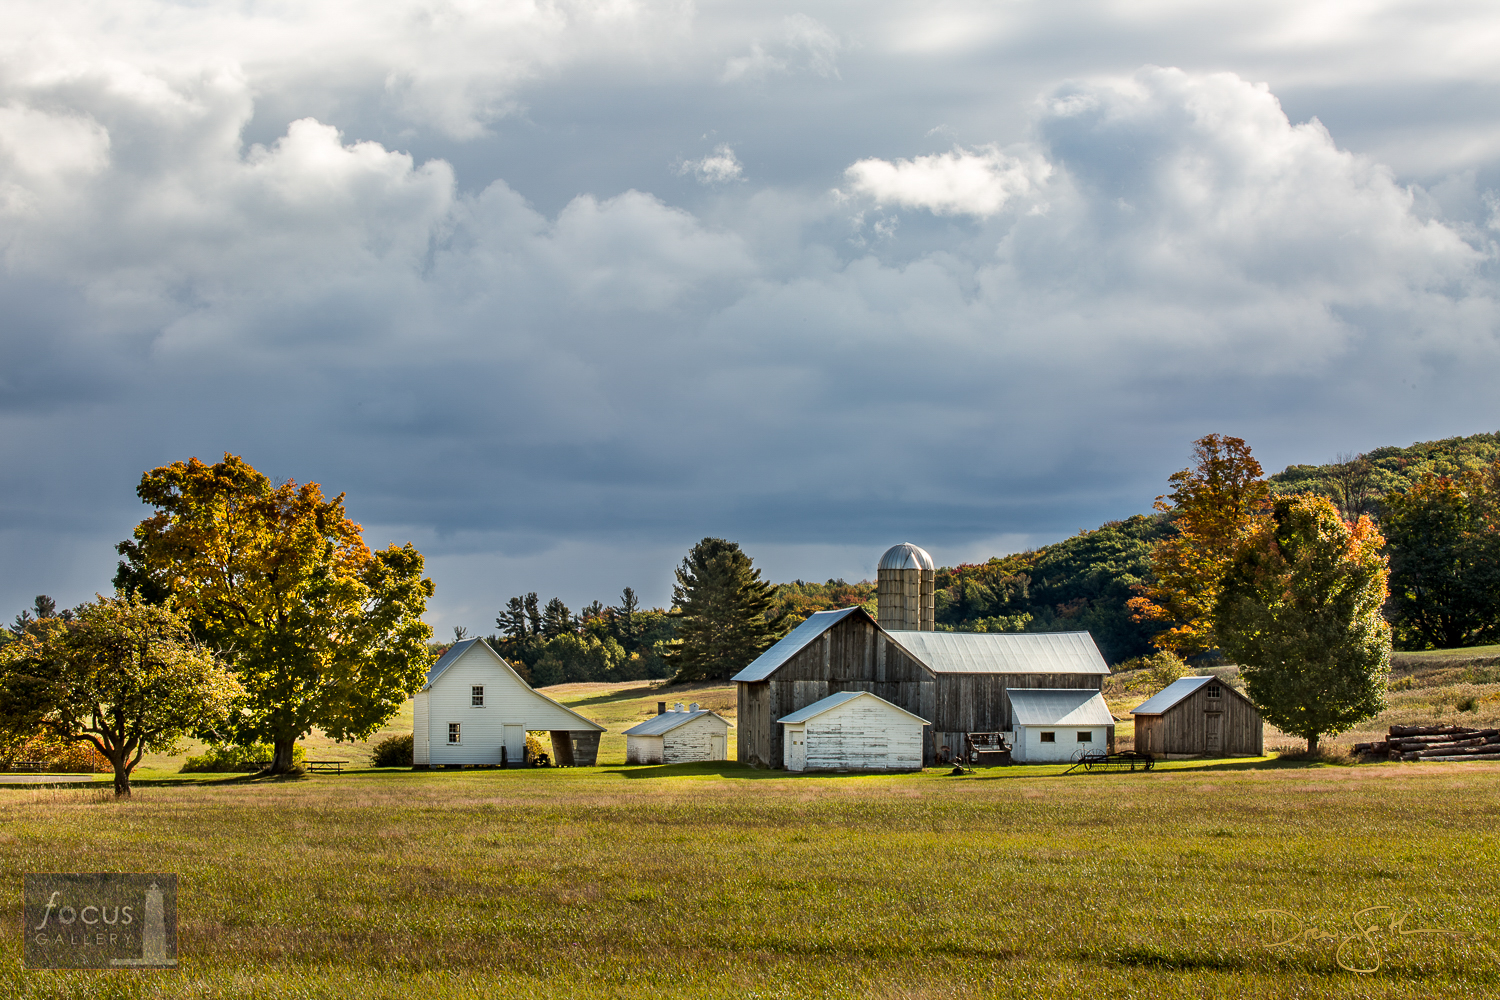 SLBE_Port_Oneida_dsmith_151018_5754-HDR Please use the "Email Focus Gallery" link below for information on available sizes and...